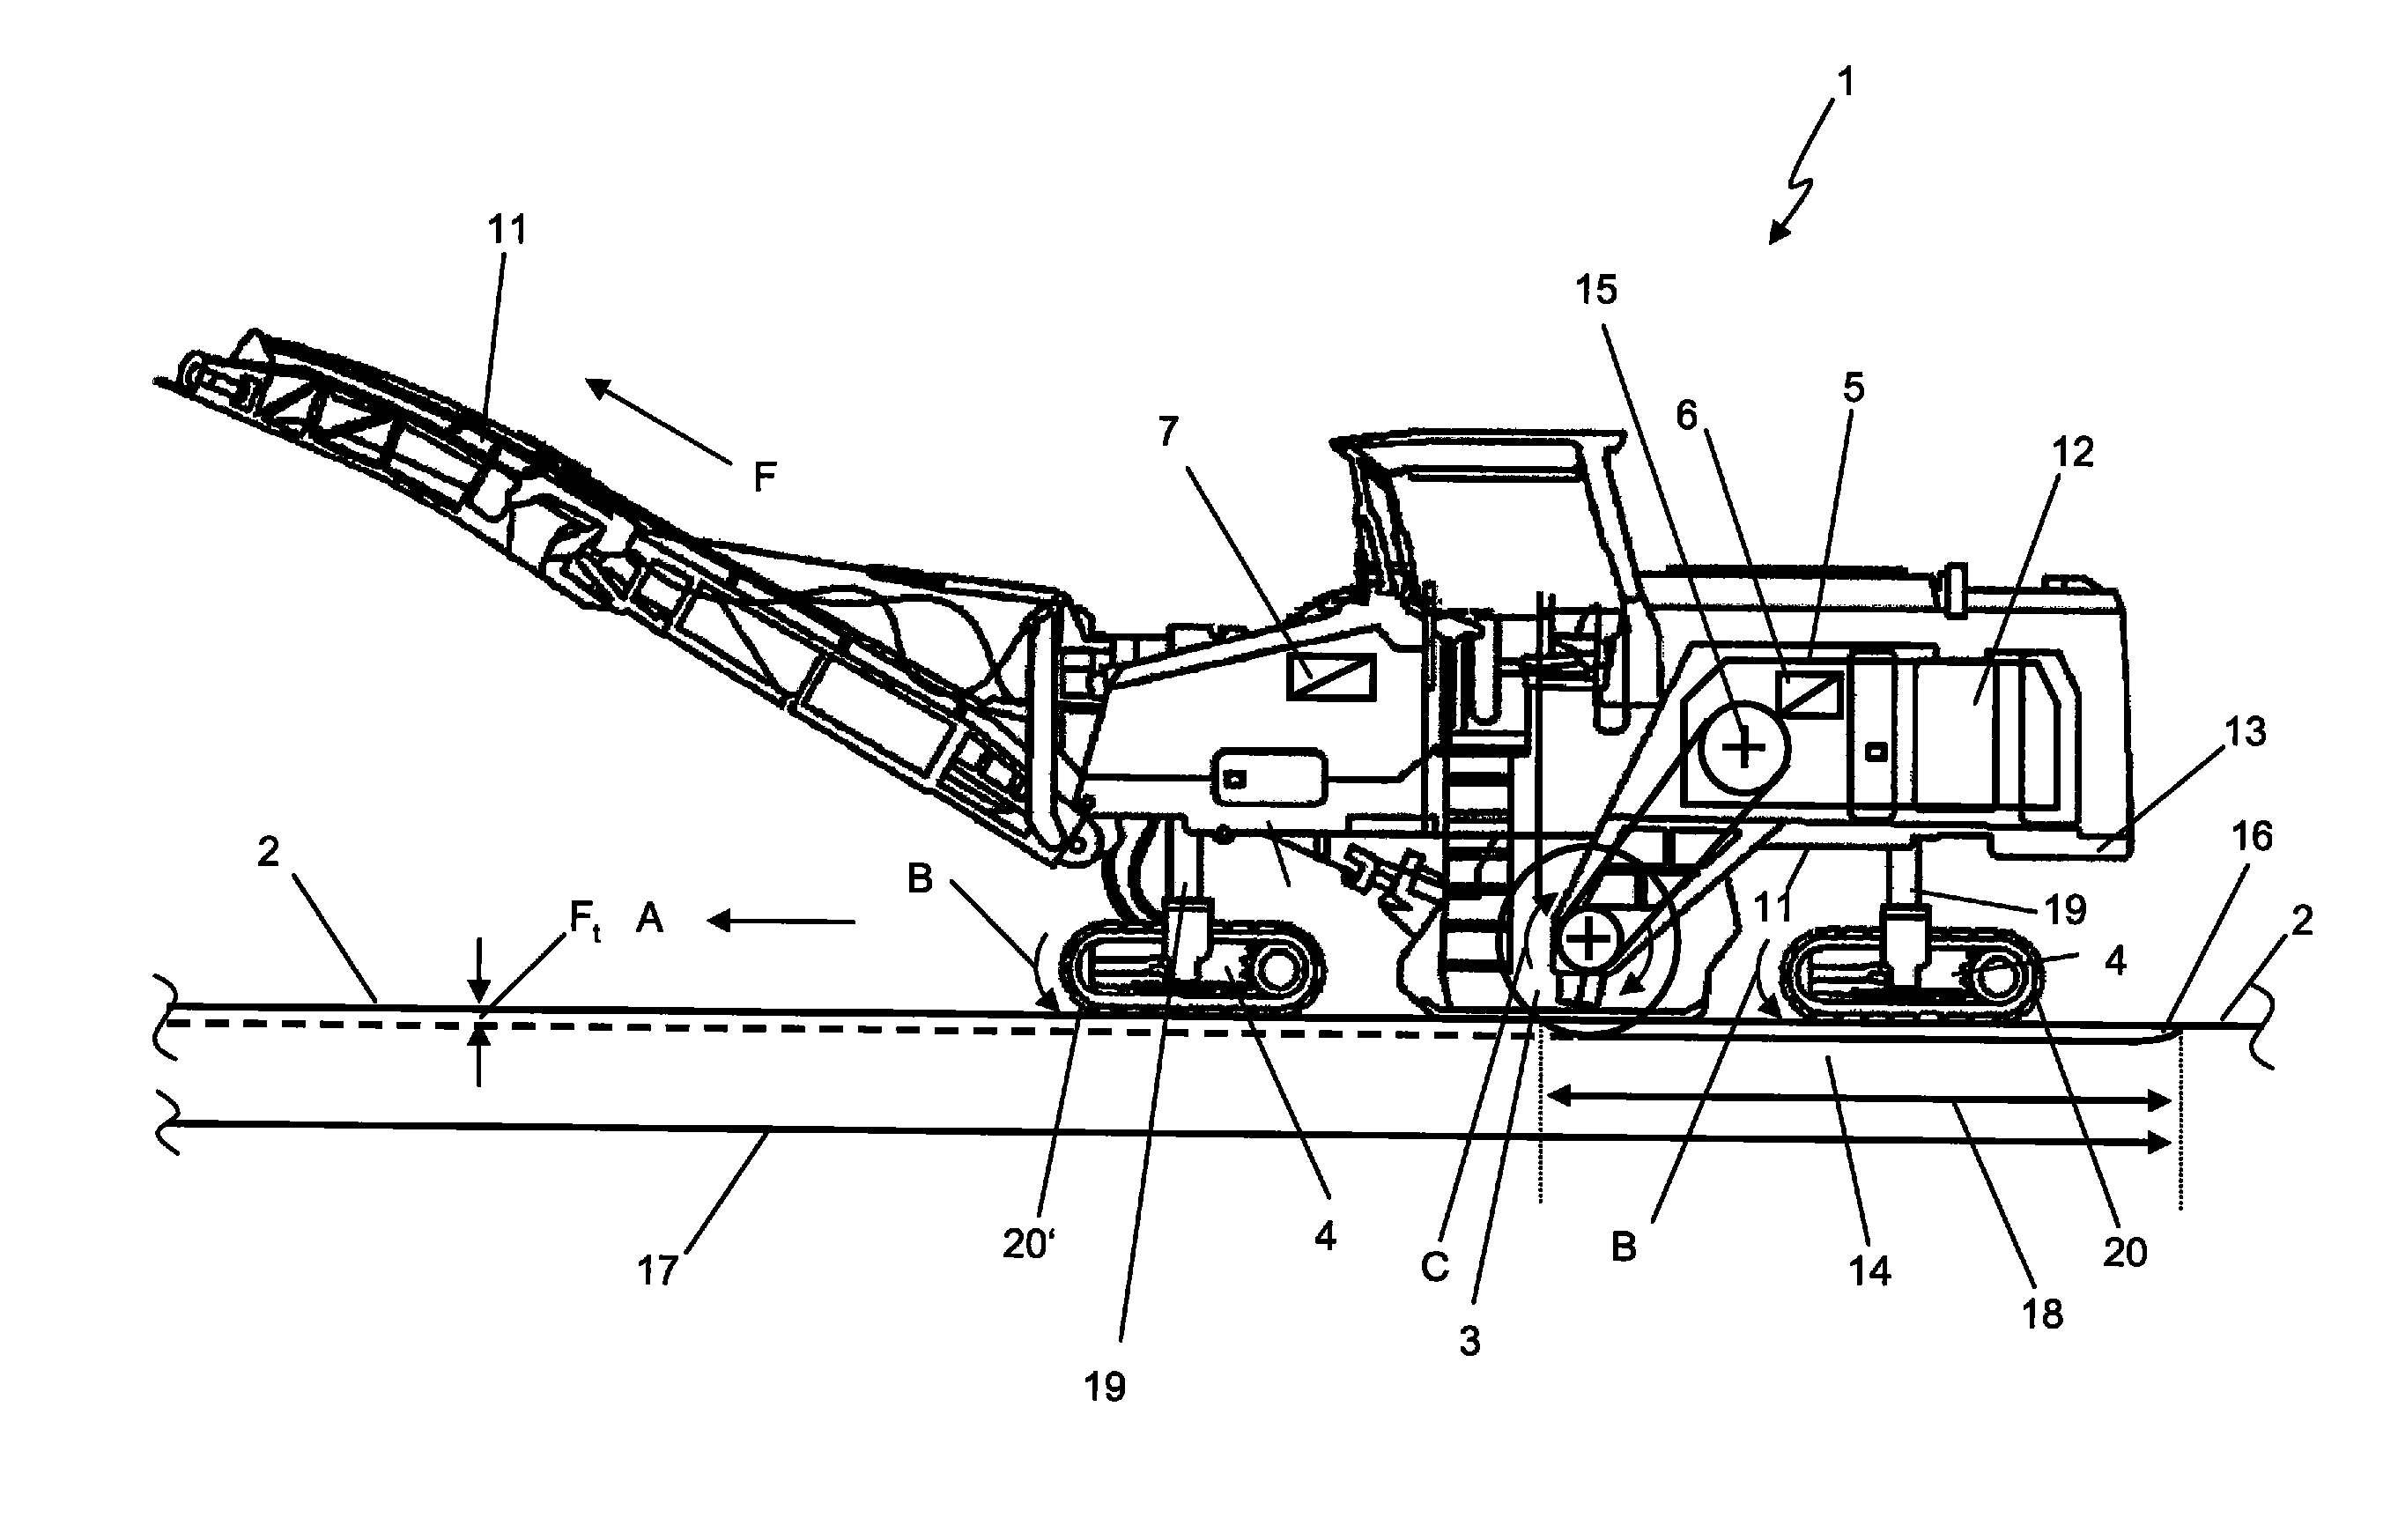 Self-Propelled Ground Milling Machine For Processing Ground Surfaces Having A Milling Device